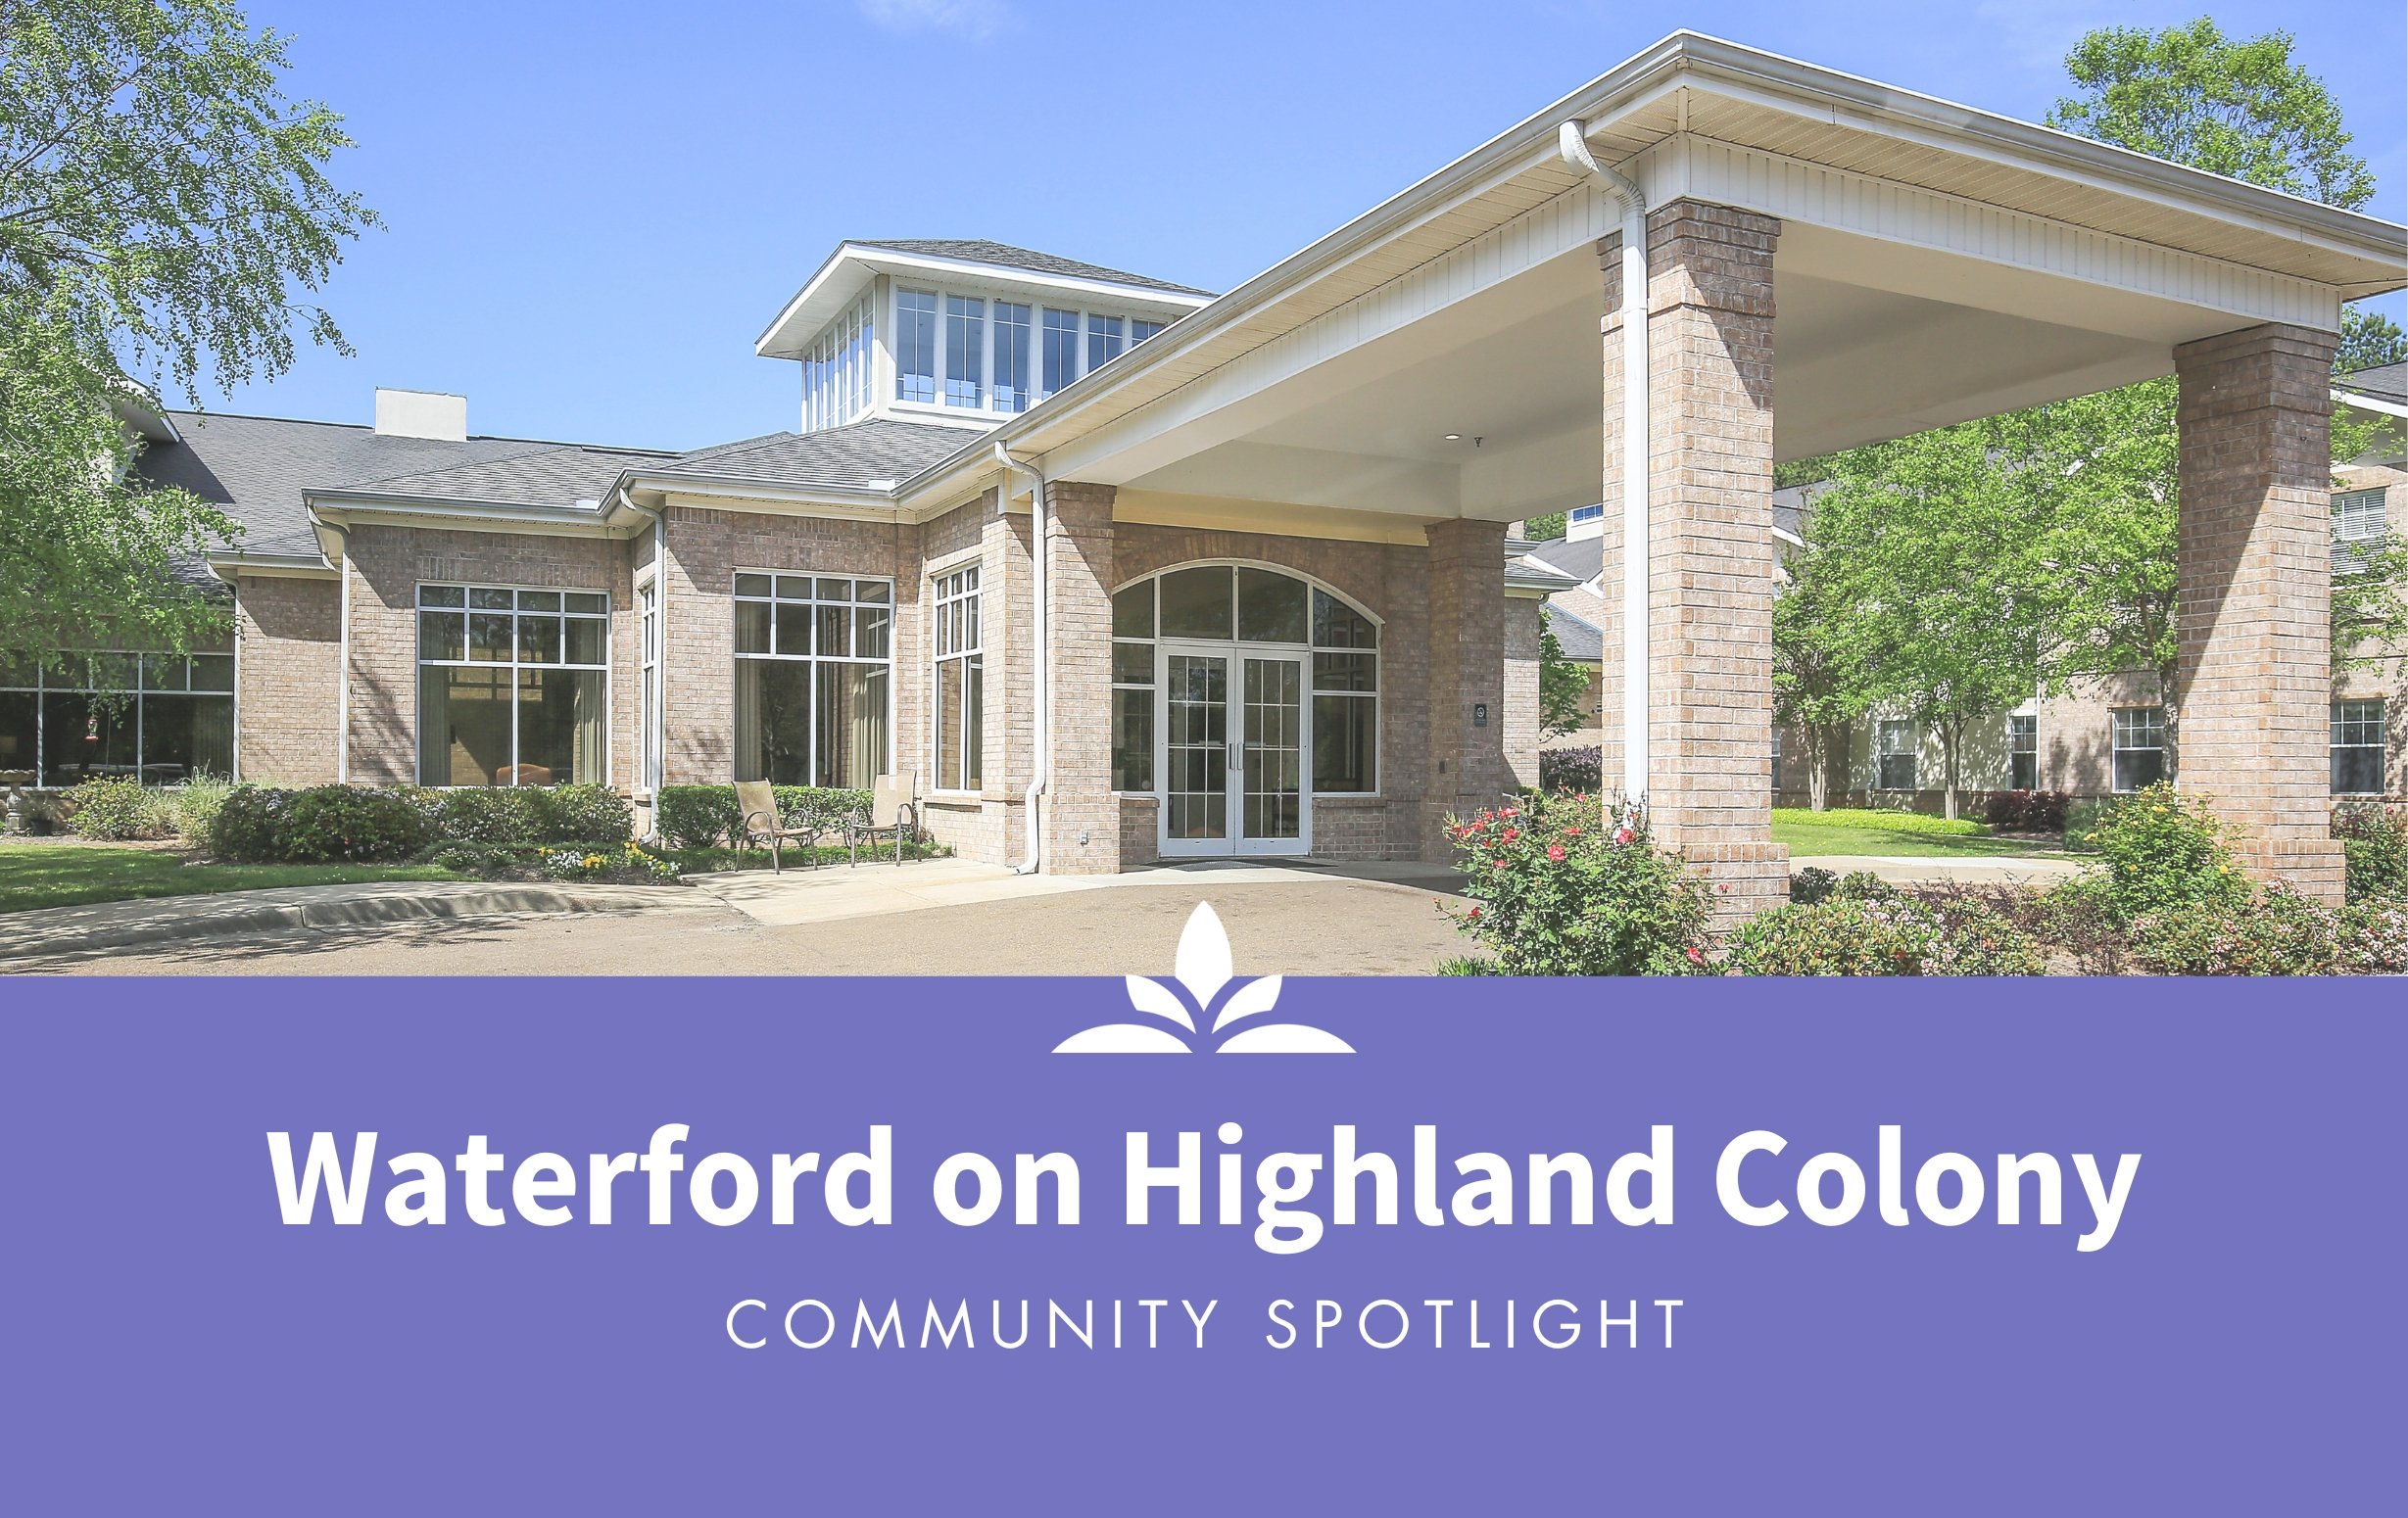 The Waterford on Highland Colony community spotlight